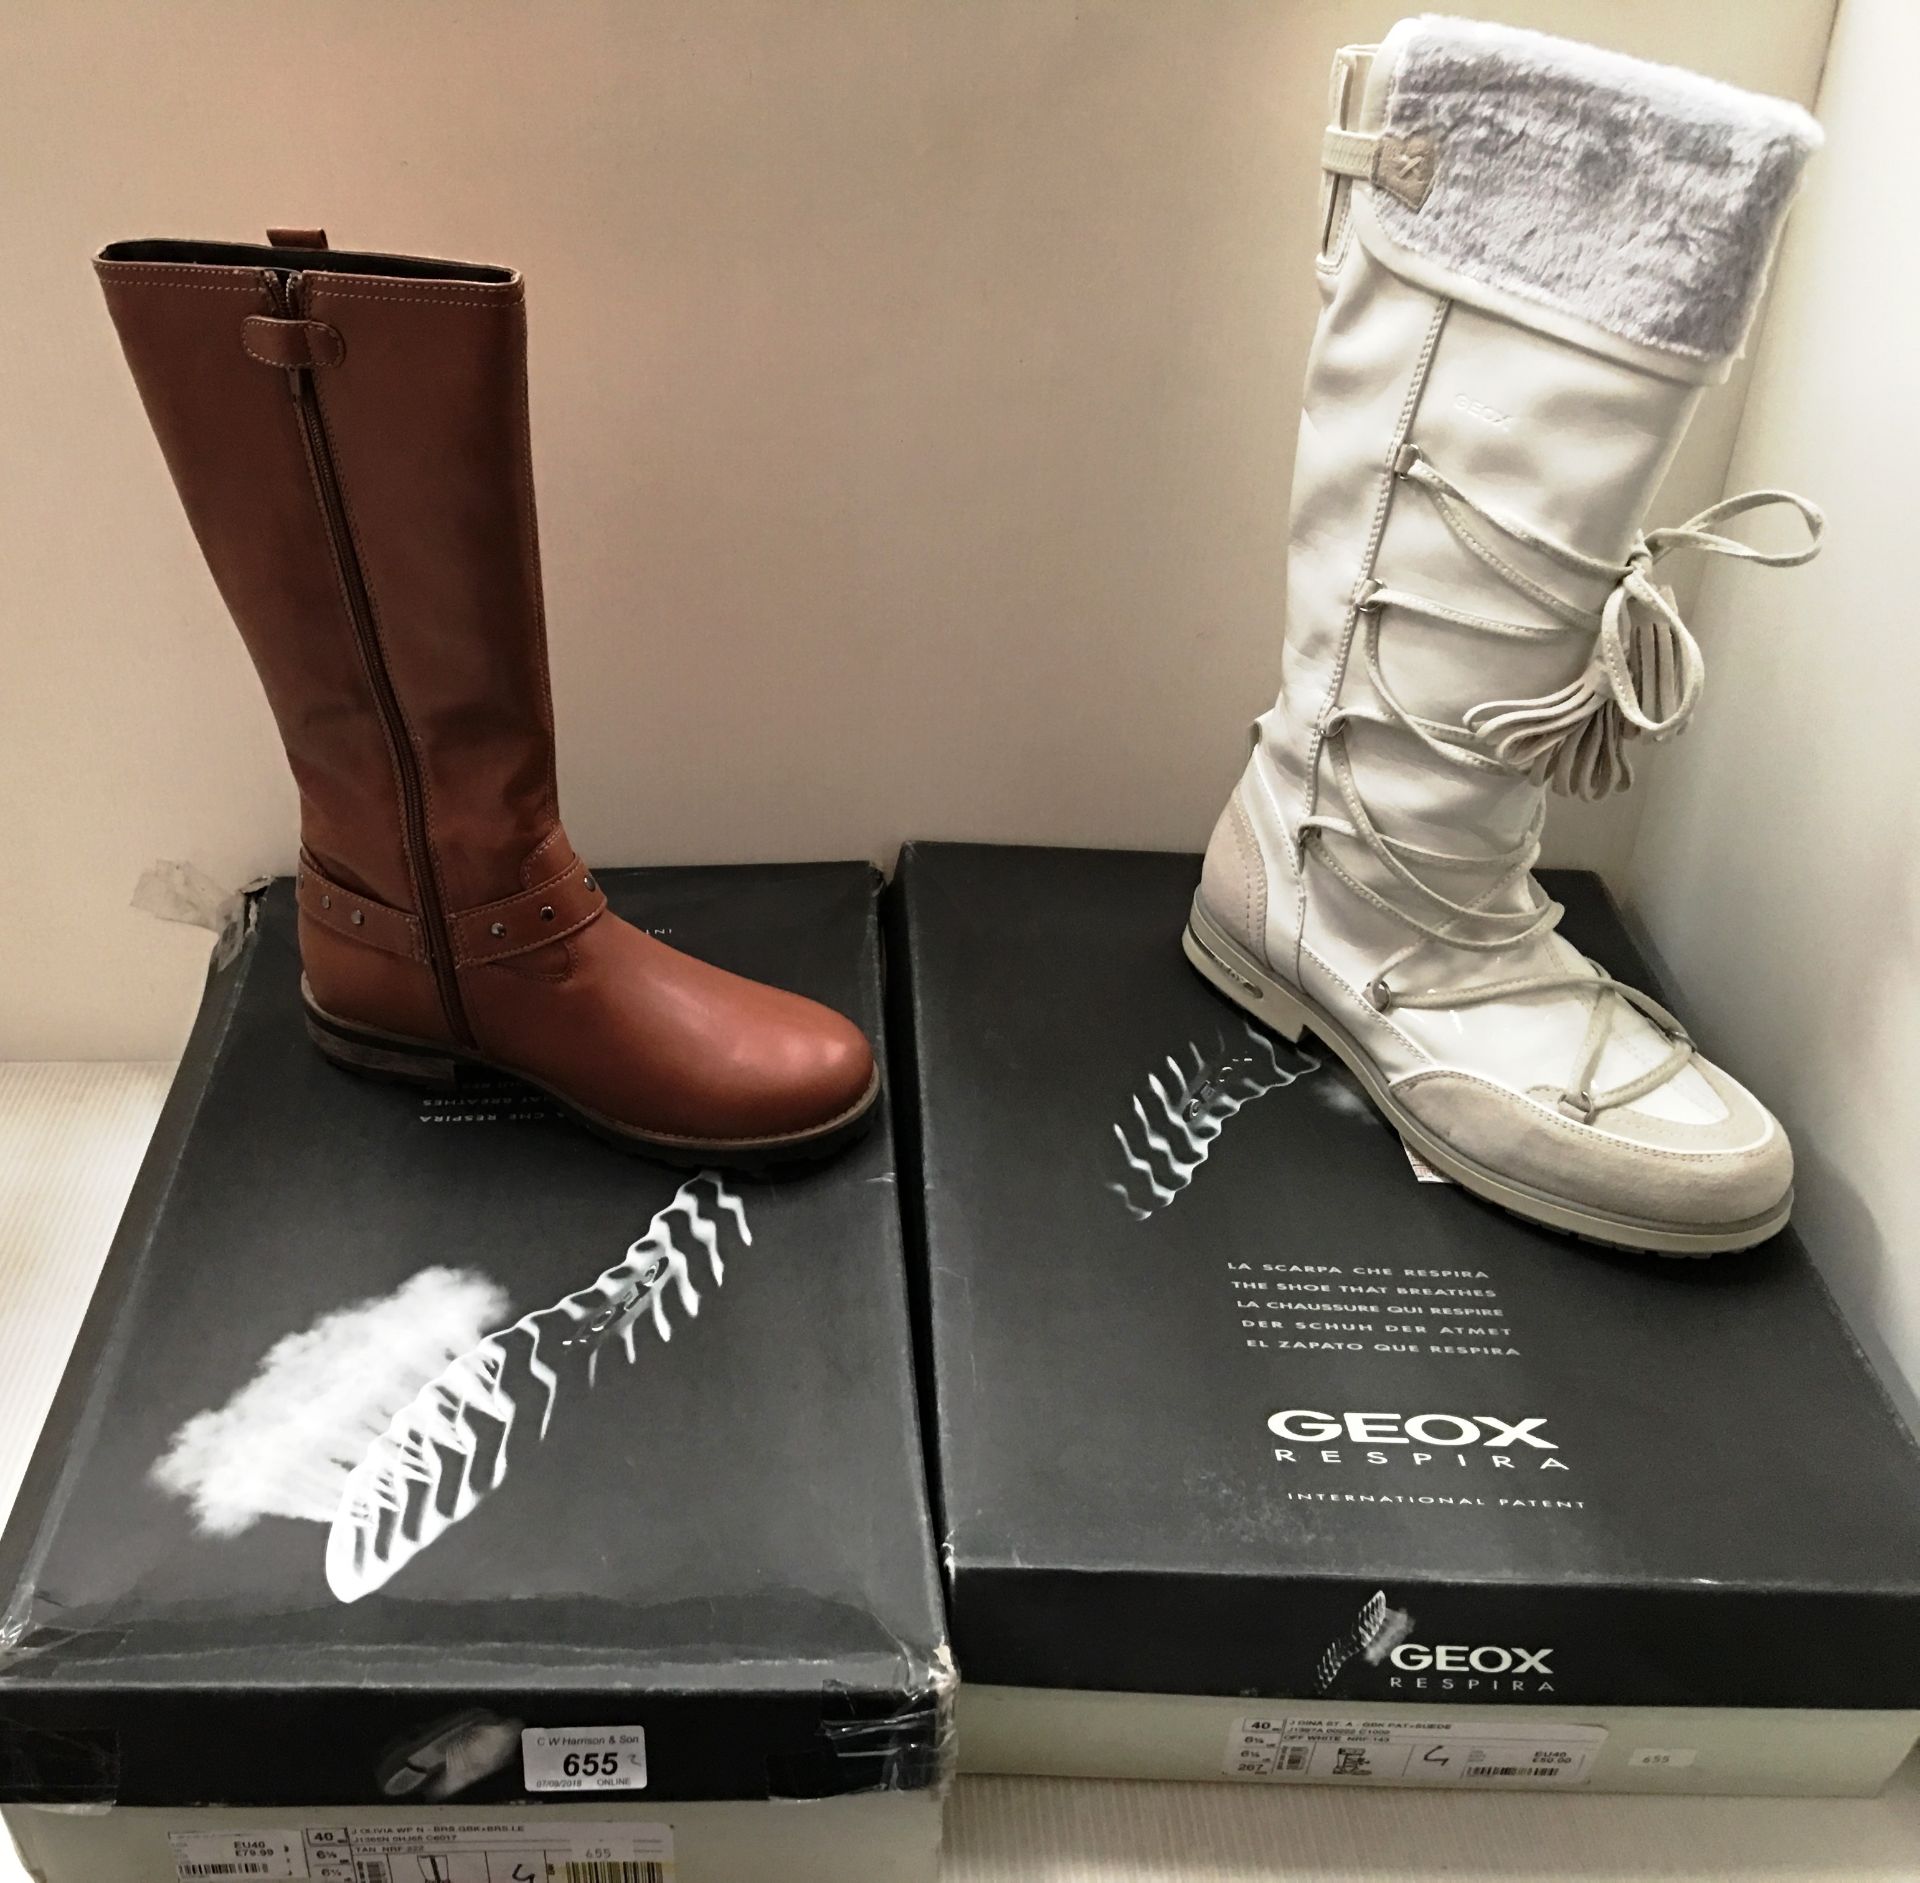 2 x pairs of adult's ankle boots - Geox